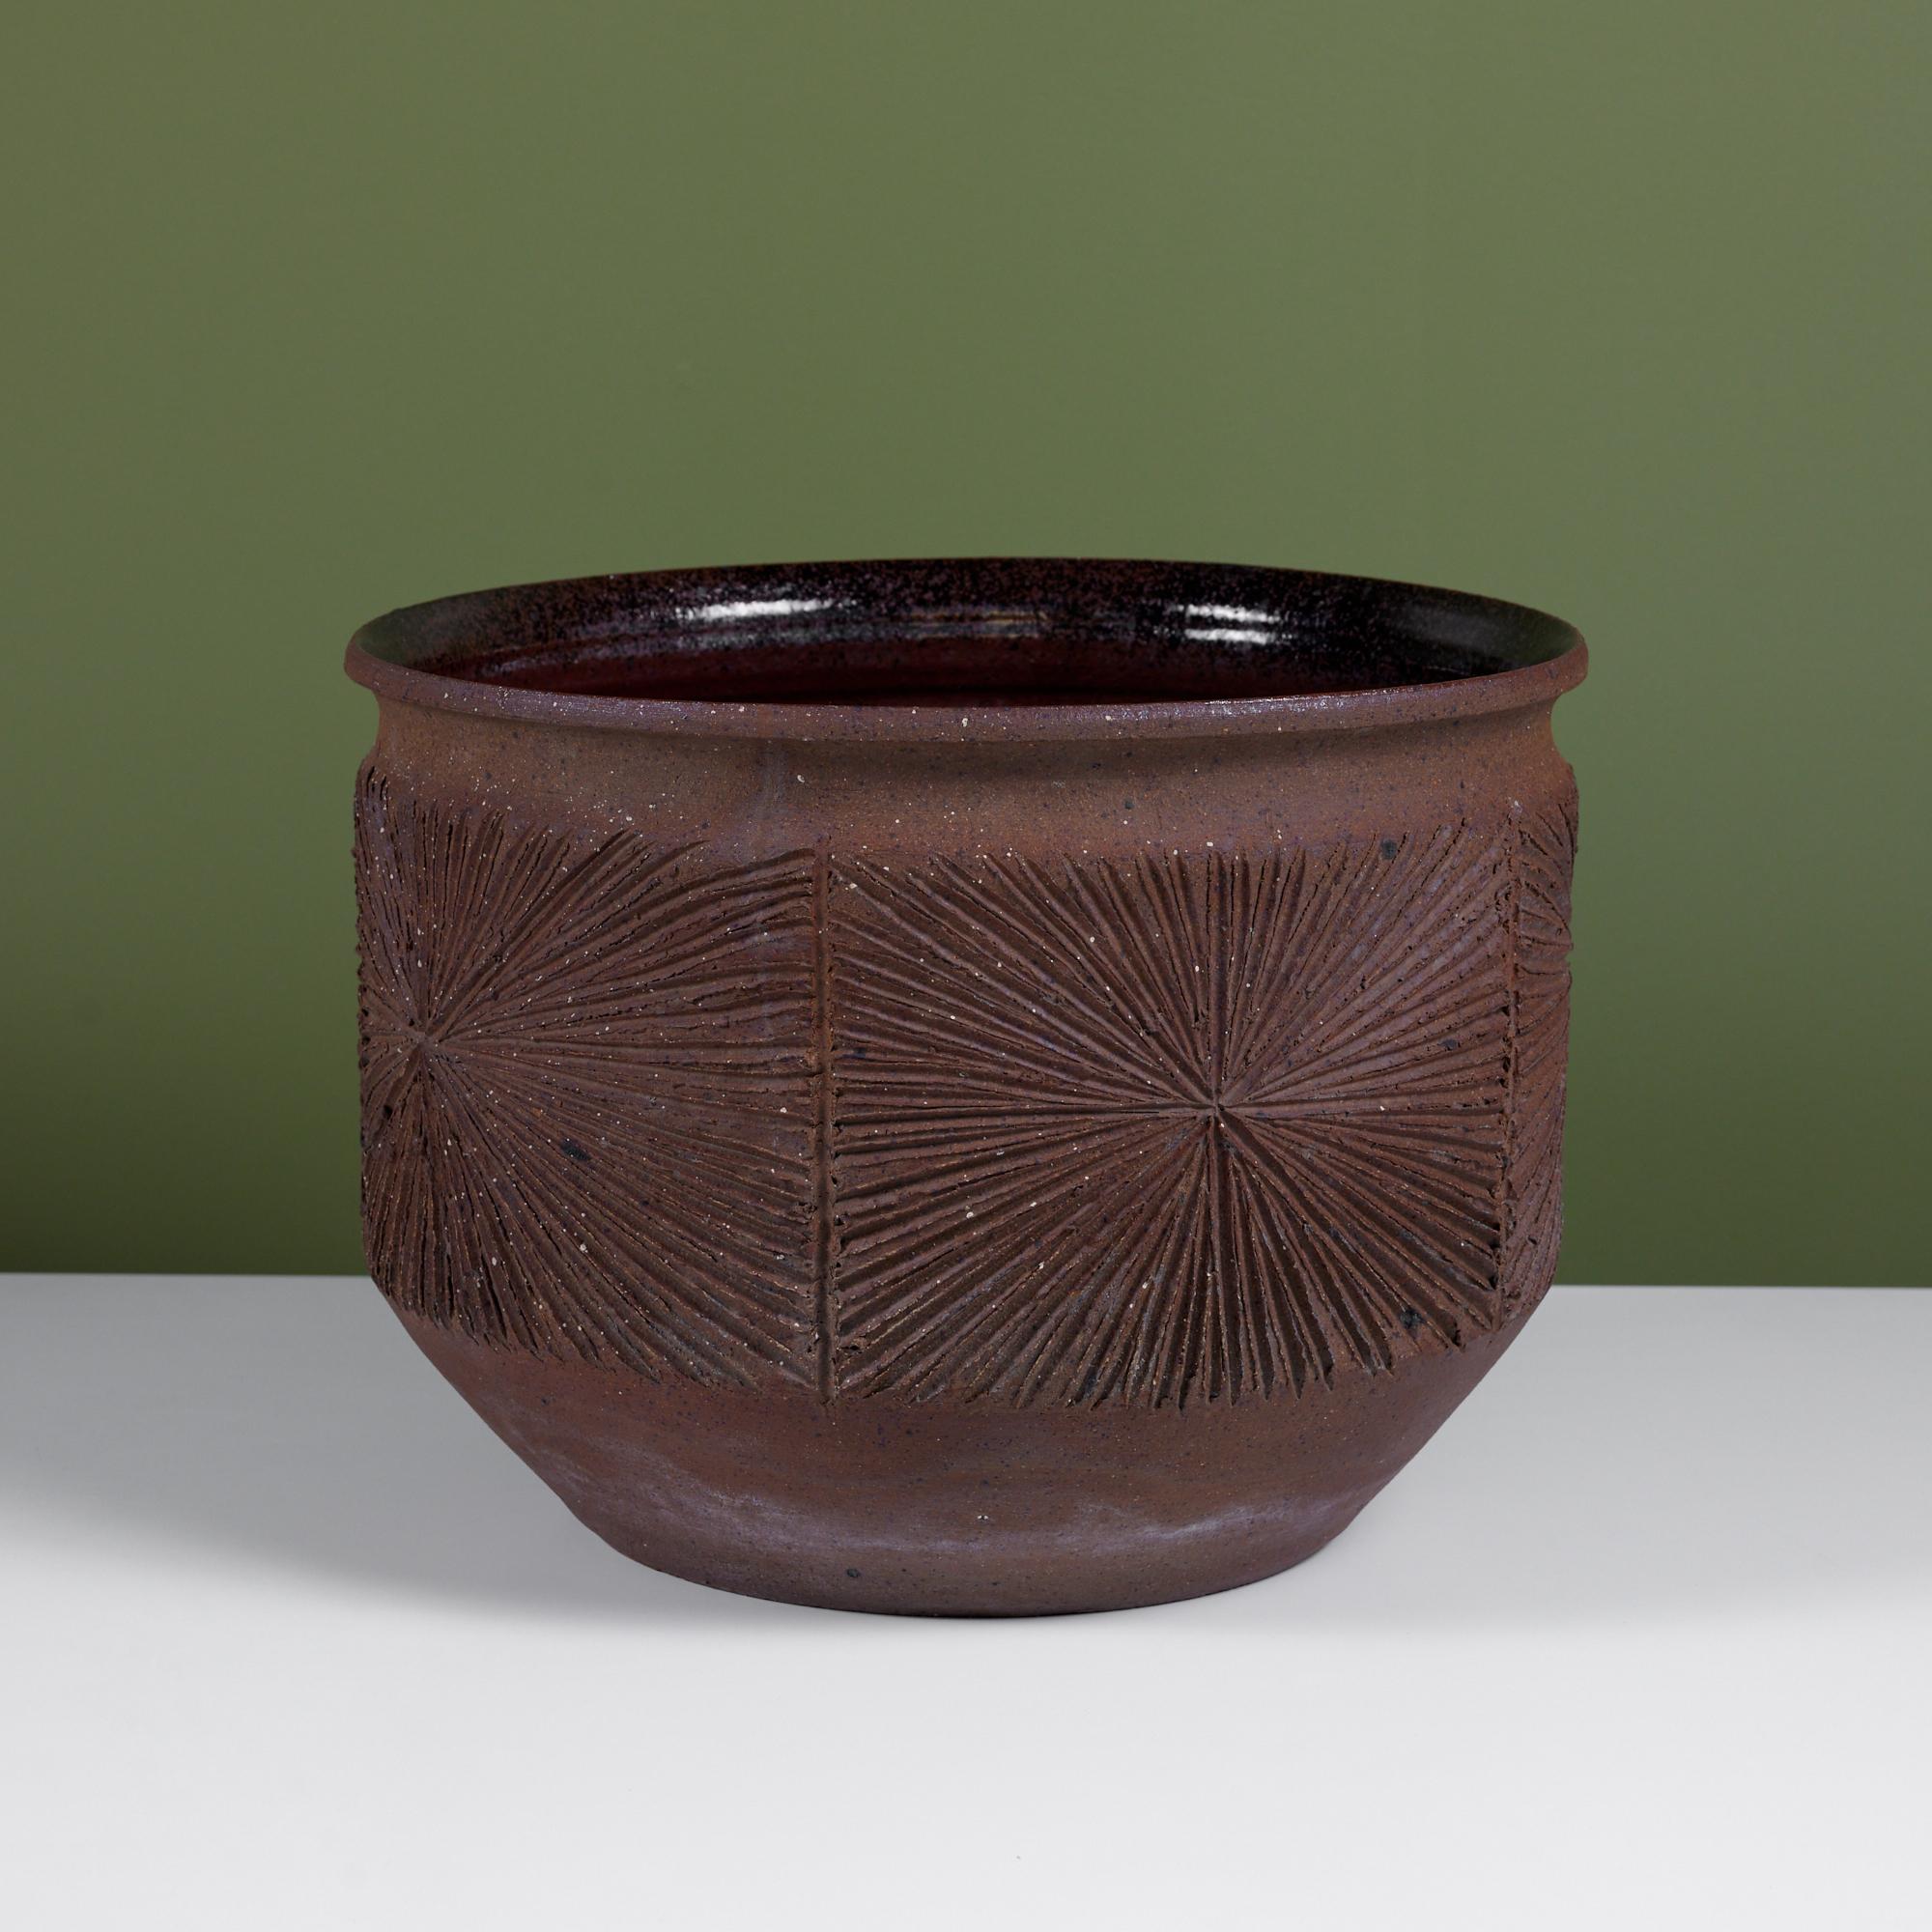 An unglazed stoneware bowl planter from David Cressey and Robert Maxwell's 1970's collaboration, Earthgender. The planter has a rounded lip with a dark speckle glazed interior, an incised all-over pattern in the 